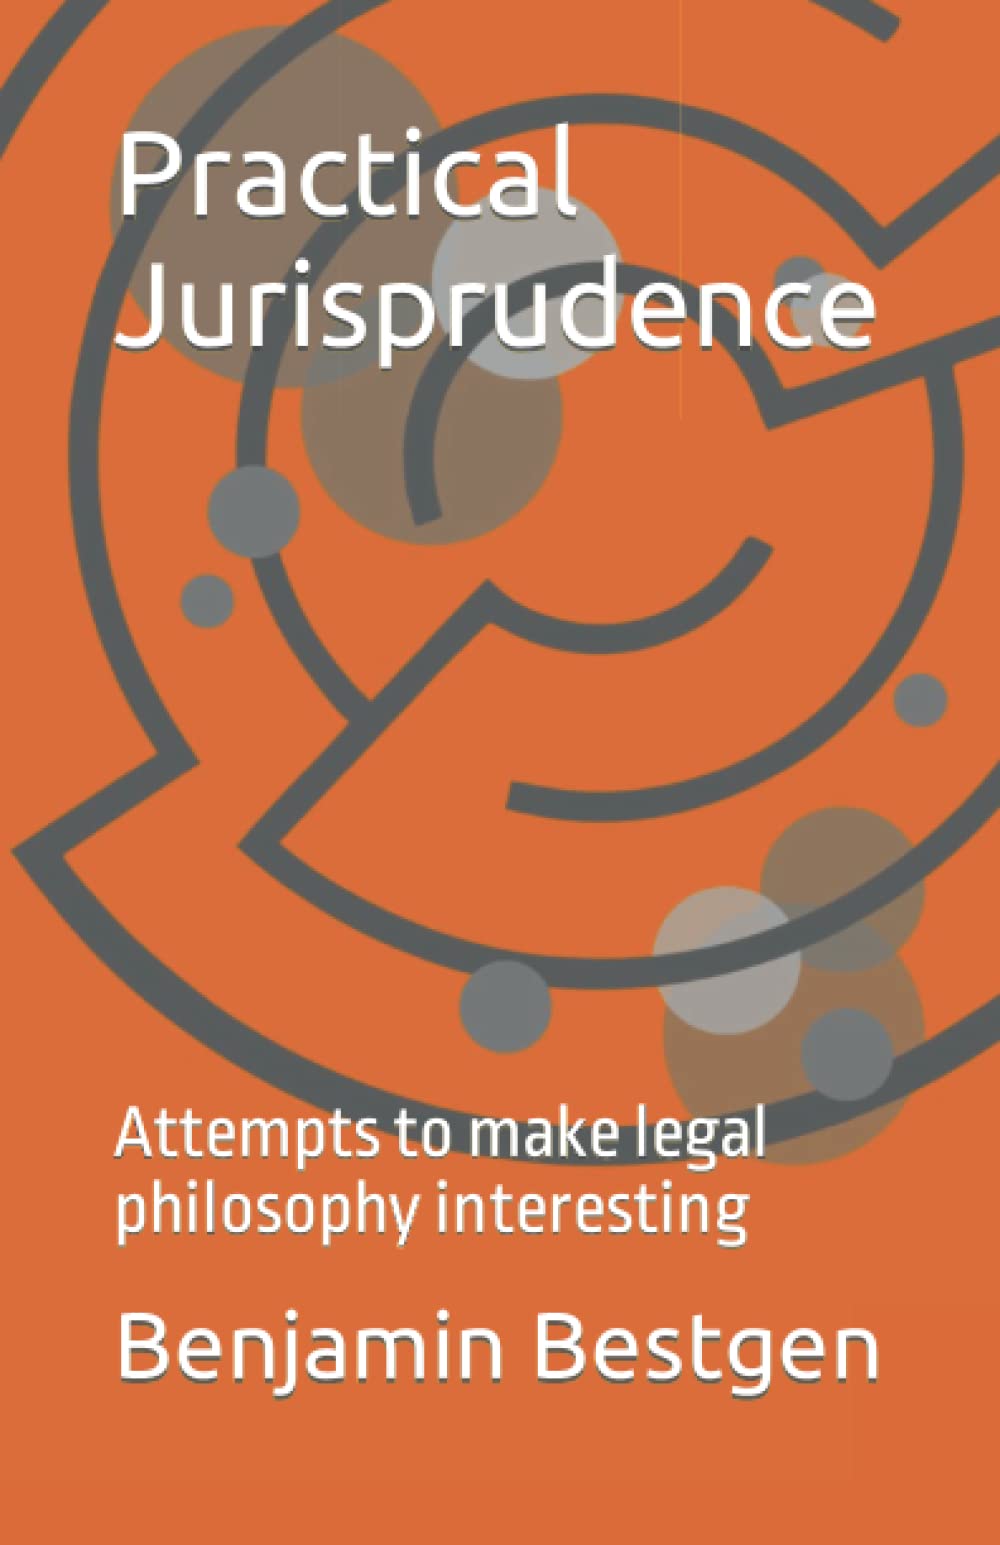 SLN's primer series becomes a book – Practical Jurisprudence: Attempts to make legal philosophy interesting out now!